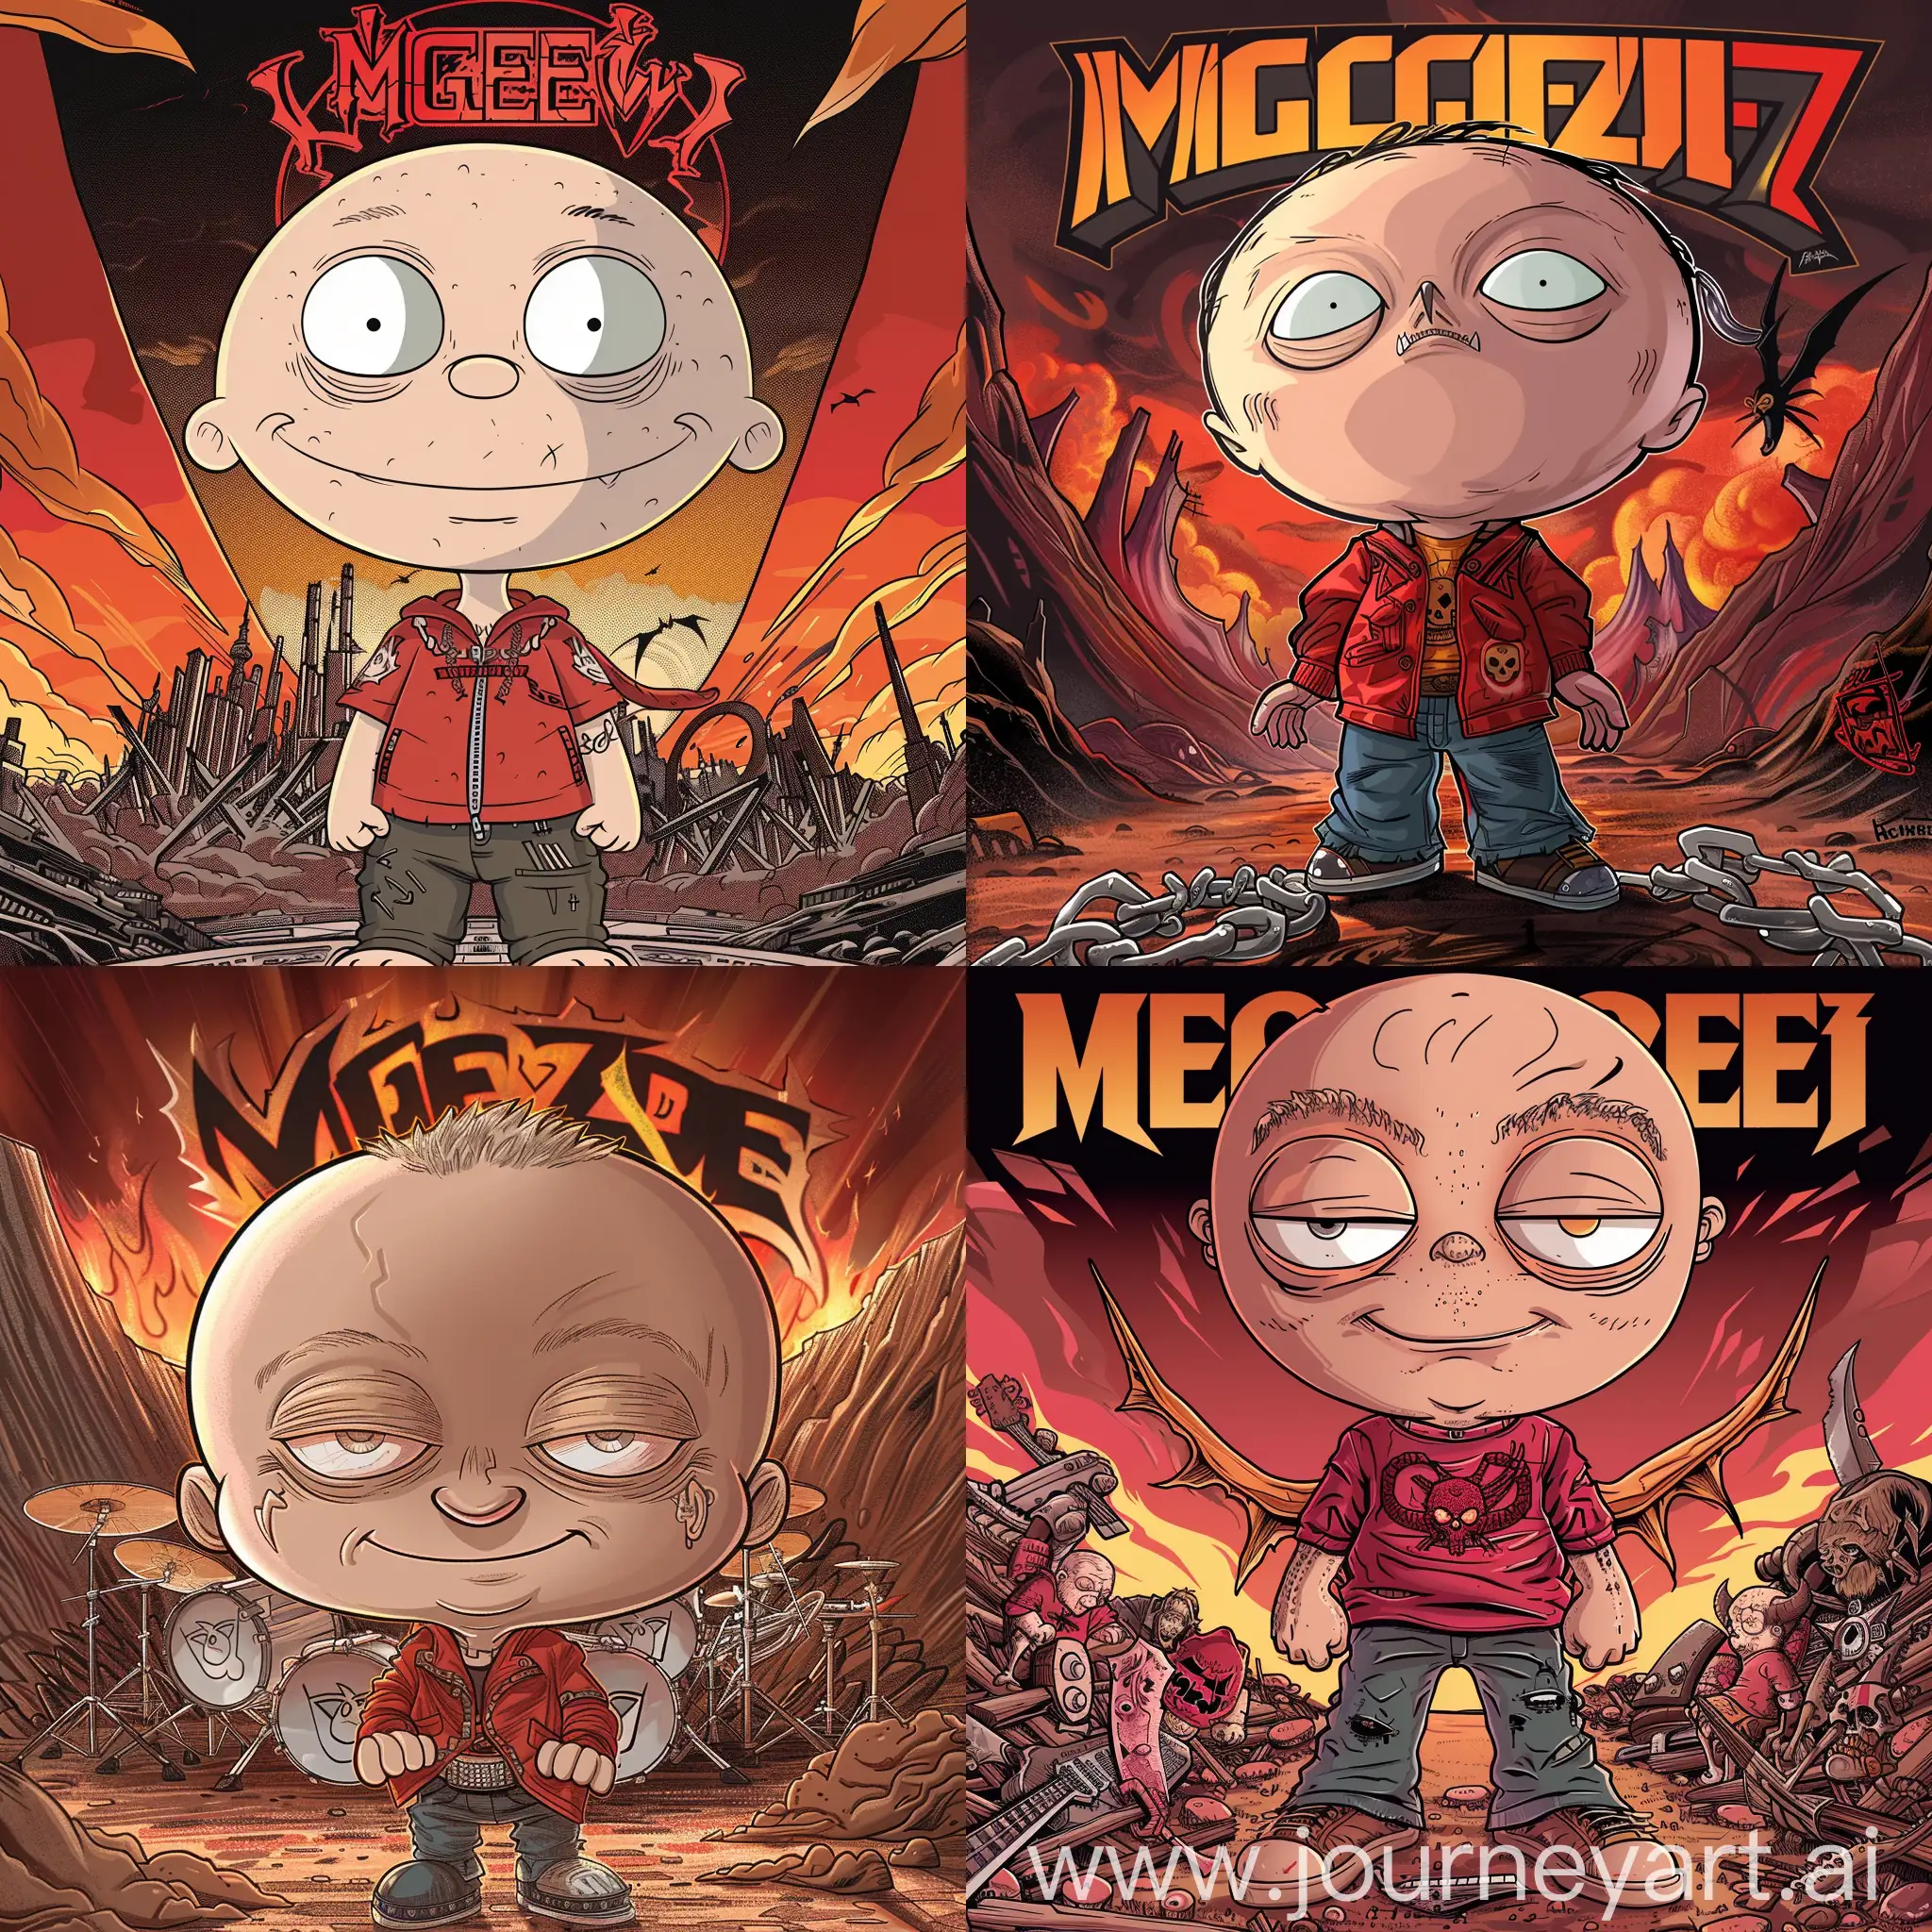 Evil version of Stewie from Family Guy, authentic and loyal to the show's art style including clothing, detailed and crisp, colored, with heavy metal references, Megadeth logo in the background, and a Lucifer or devil shape